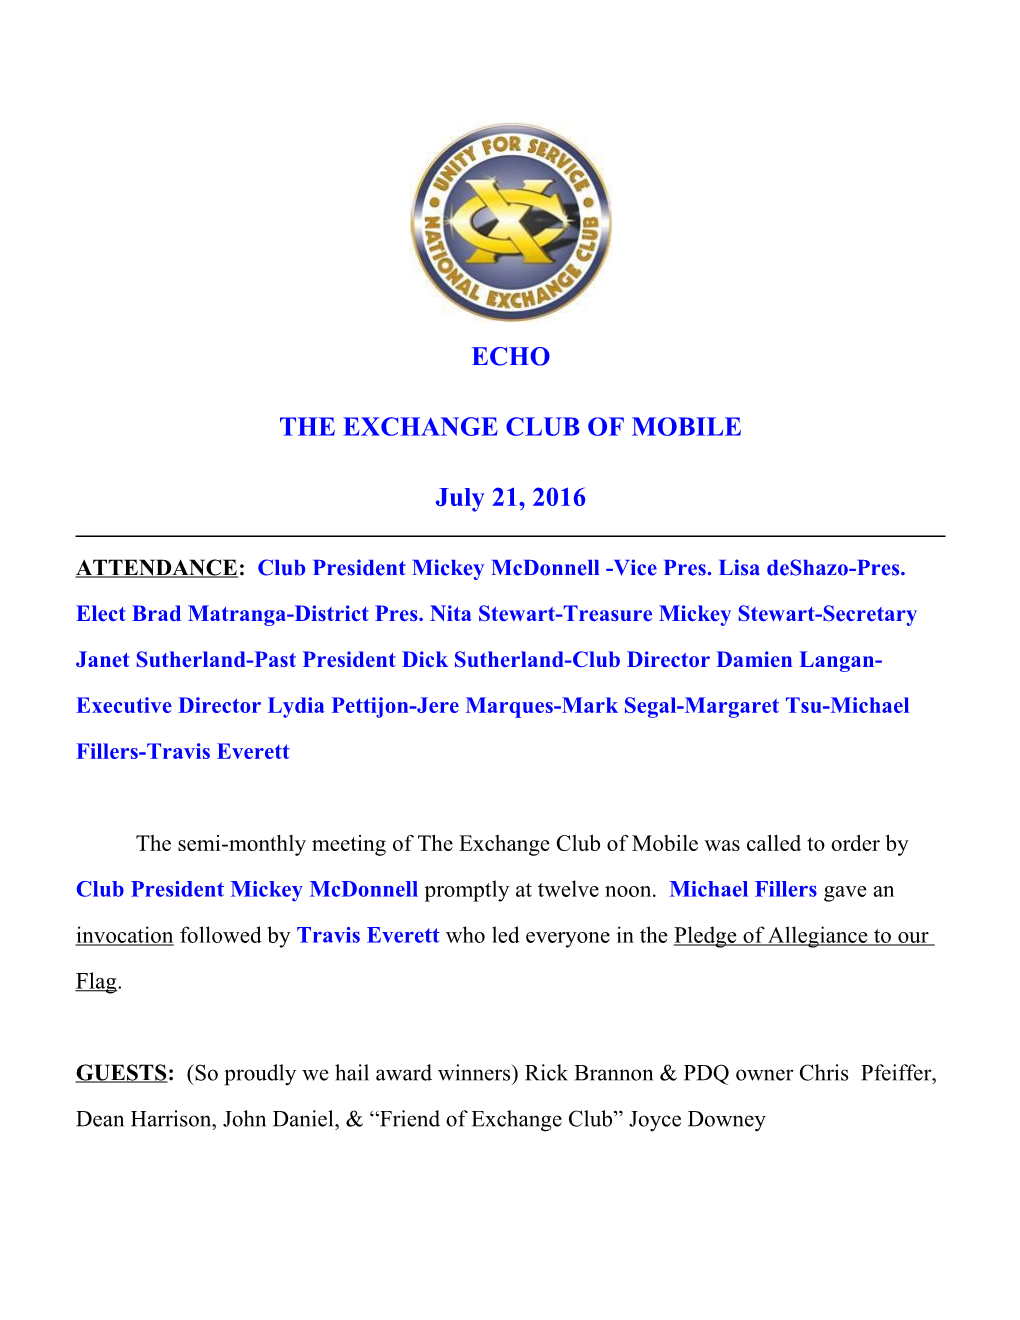 The Exchange Club of Mobile s1